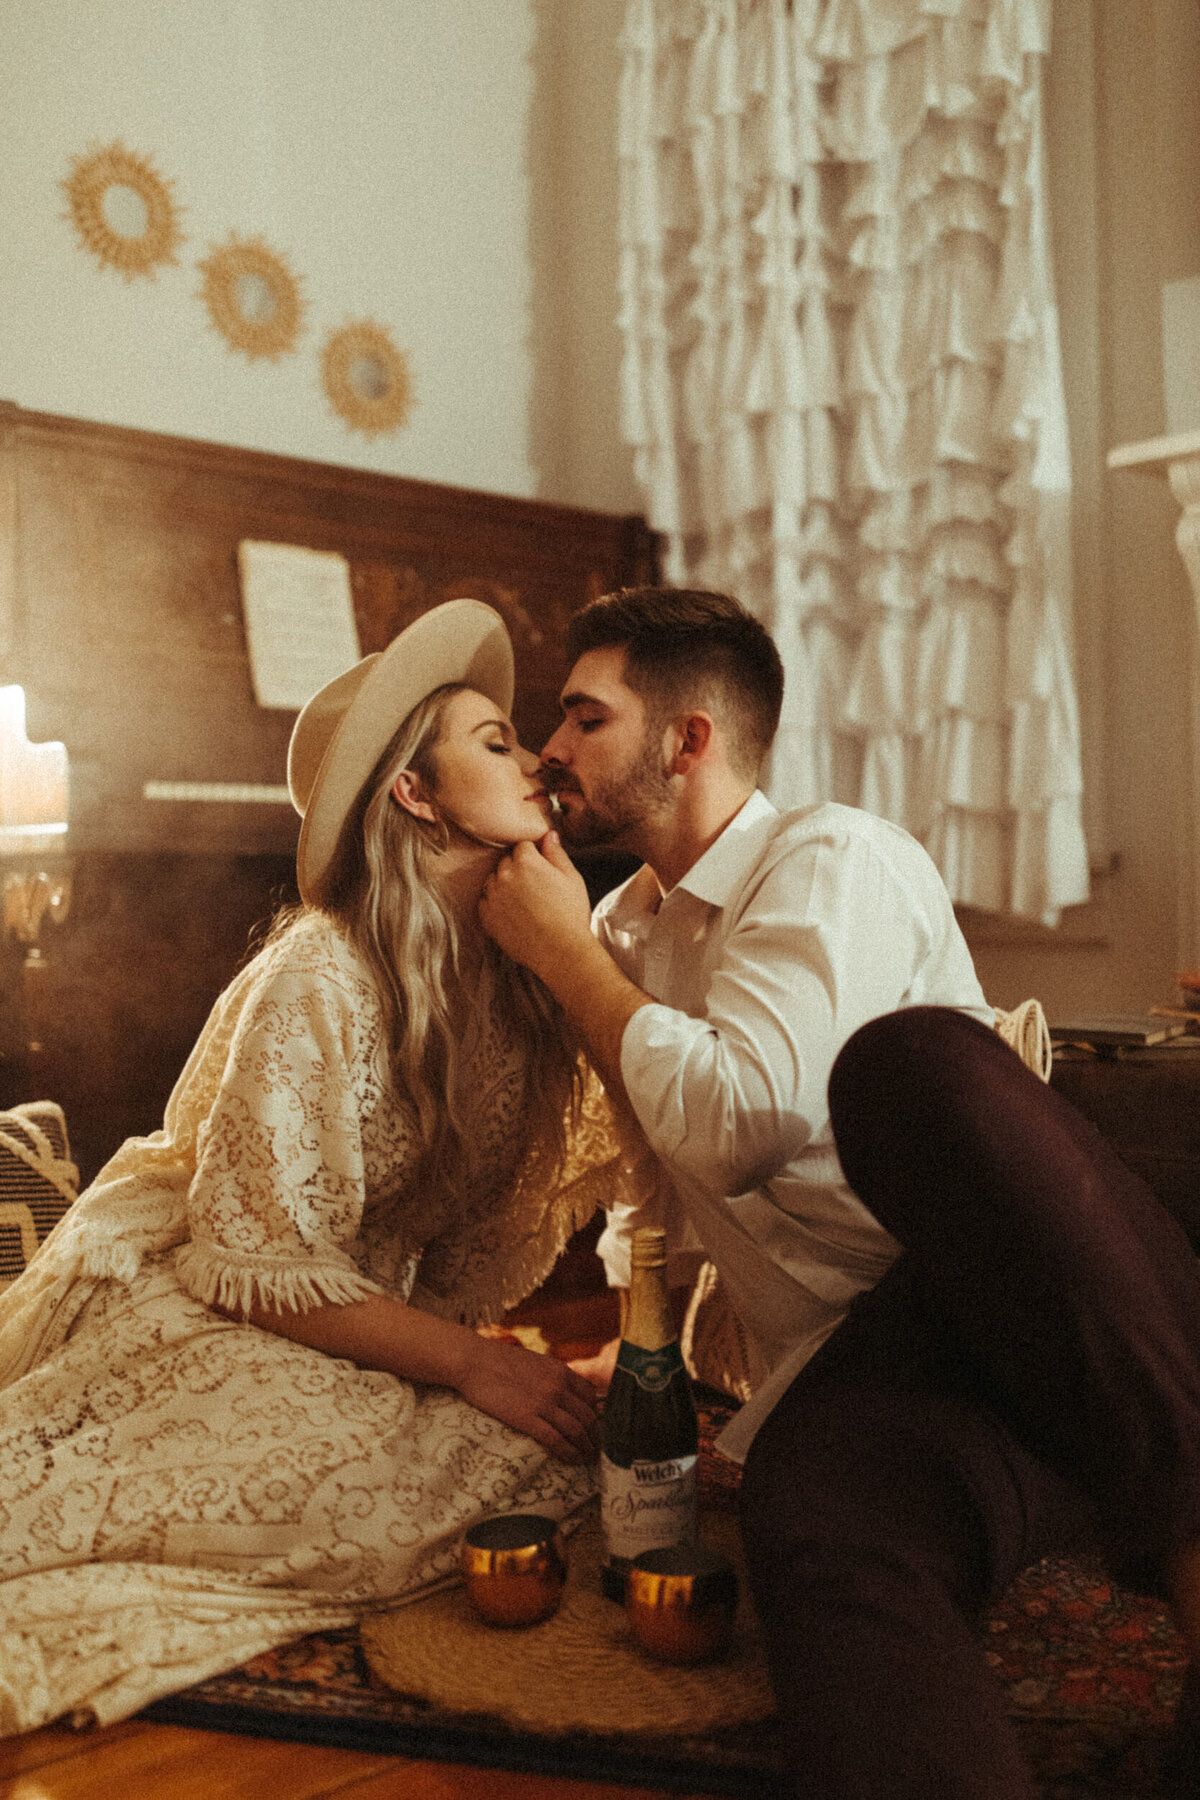 Groom pulling bride in for a kiss while sitting on the floor at their intimate Airbnb reception after their elopement